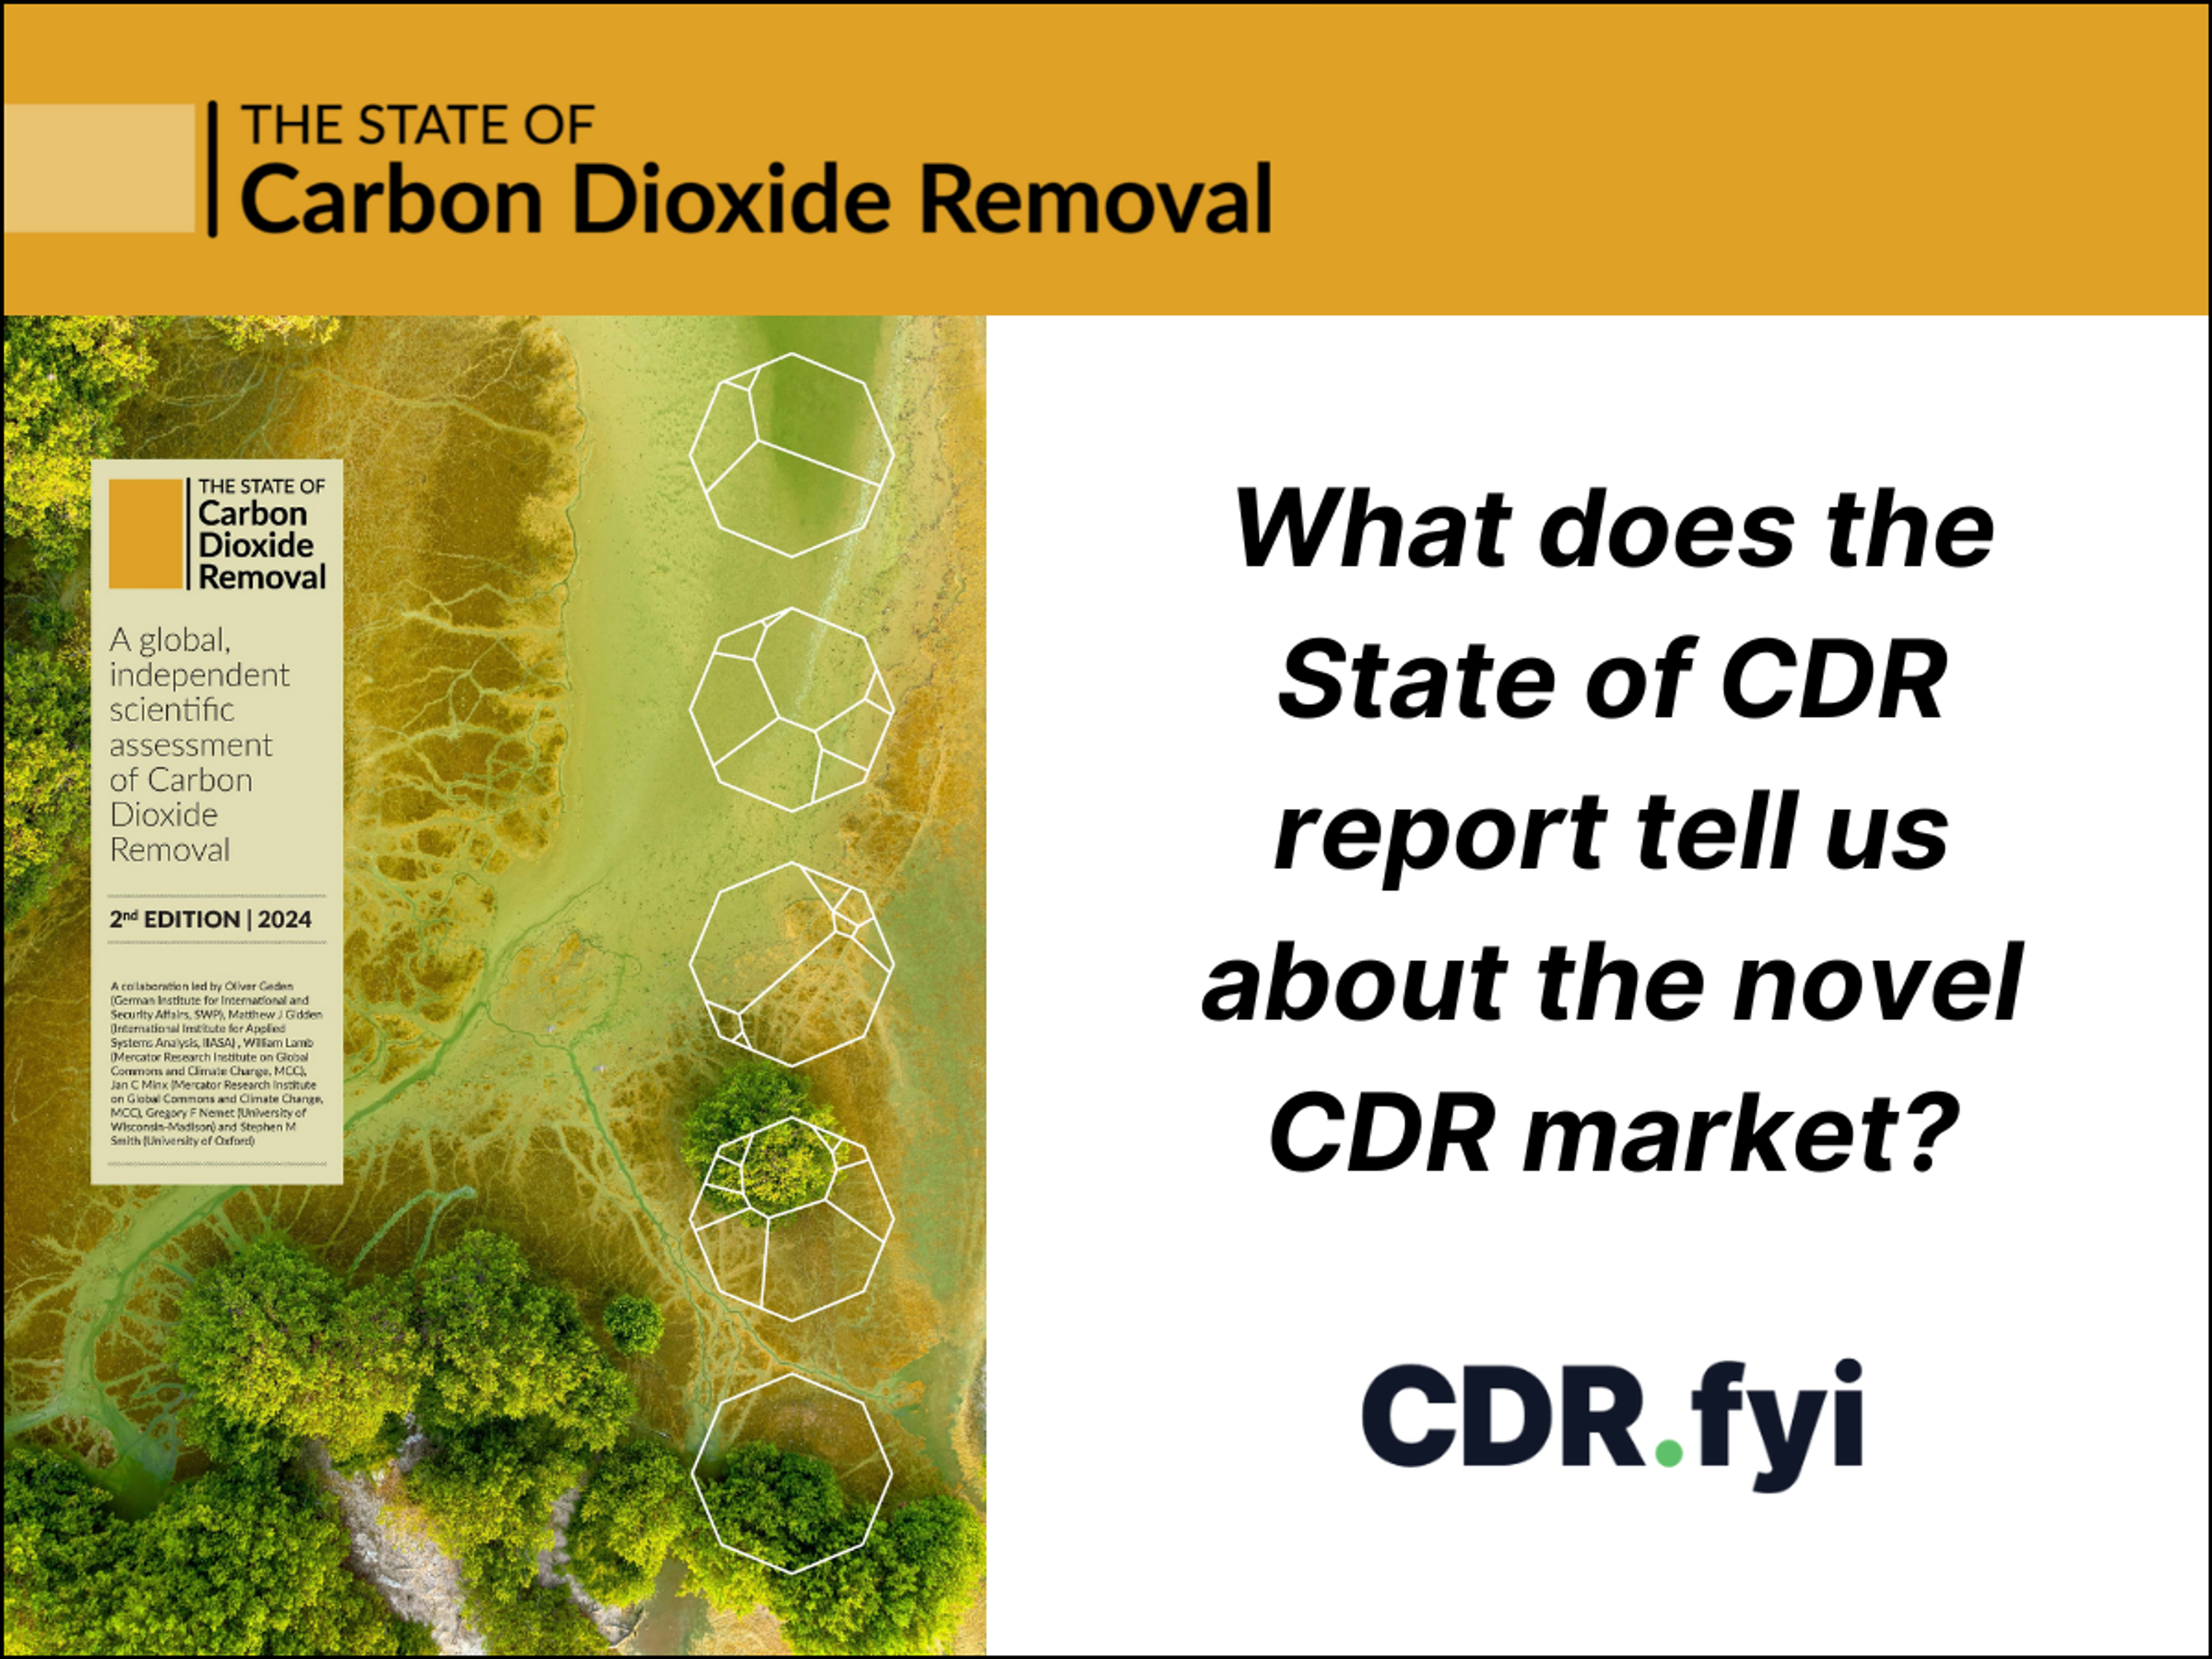 What the State of CDR Report Tells us about the Removal Market blog post image